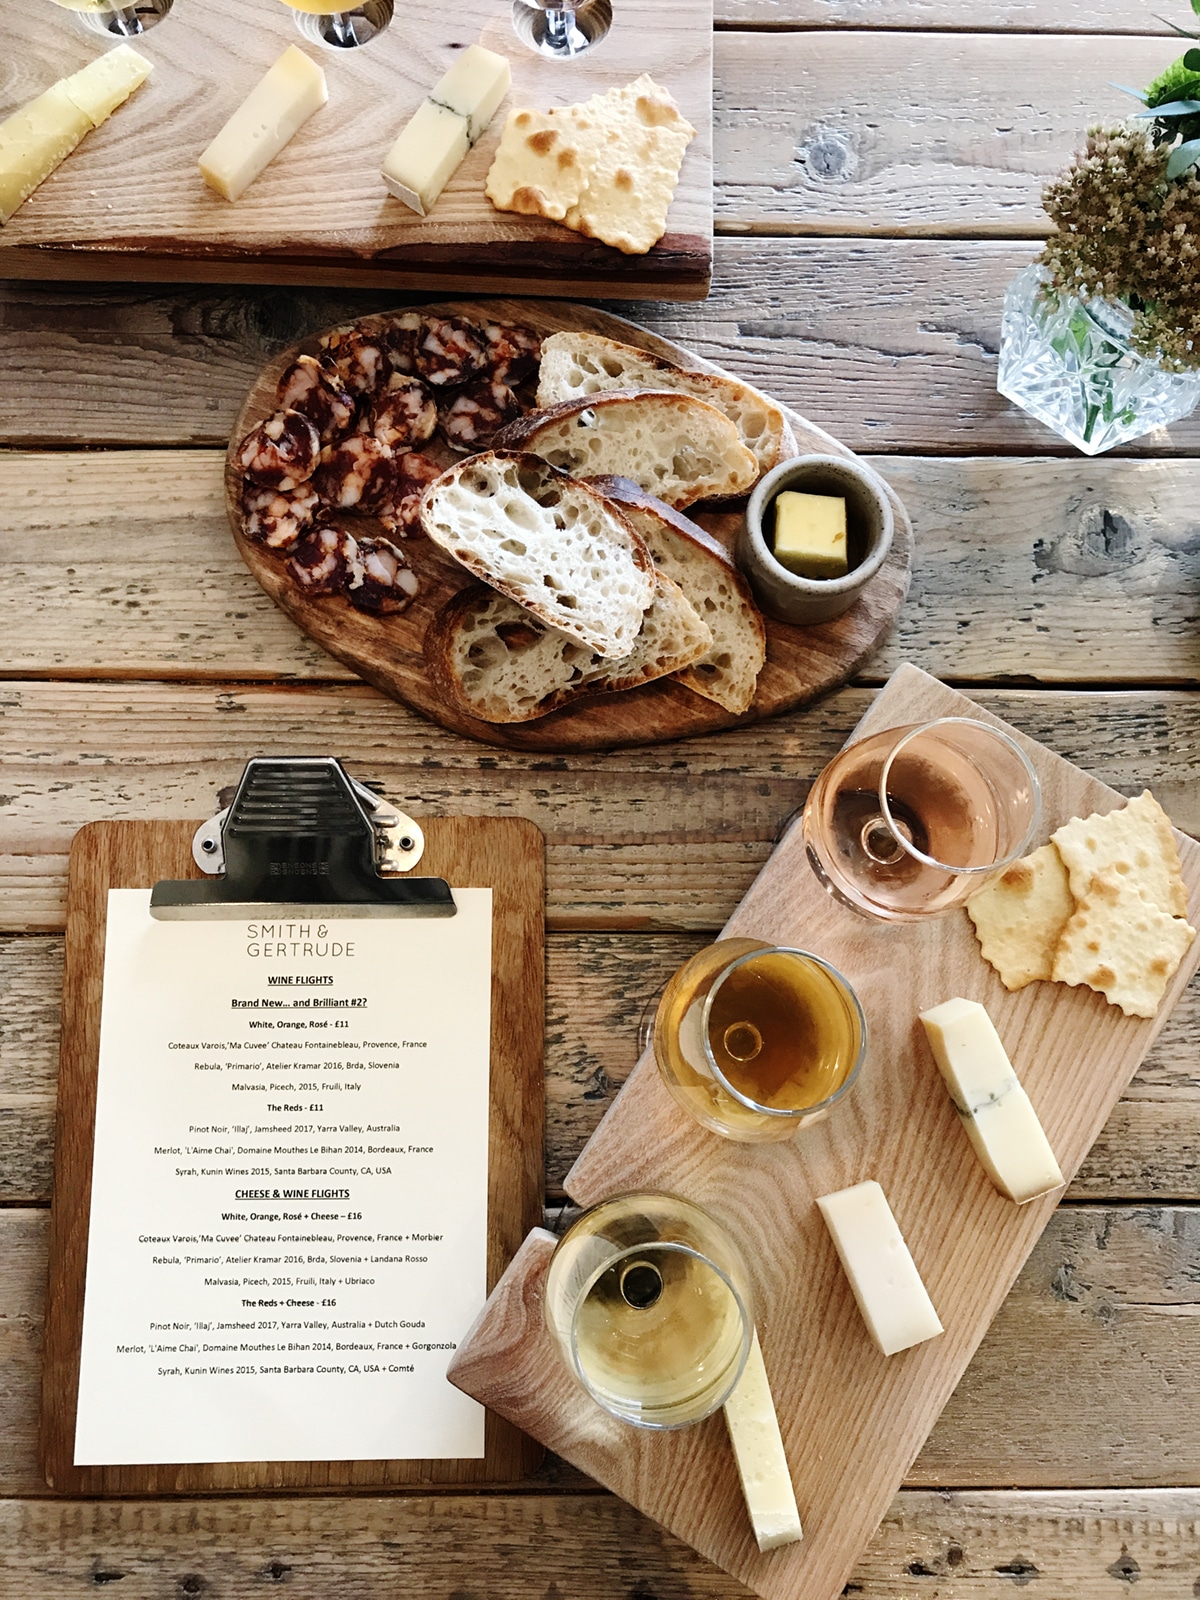 wine tasting and snacks at smith and gertrude | edinburgh city guide on coco kelley